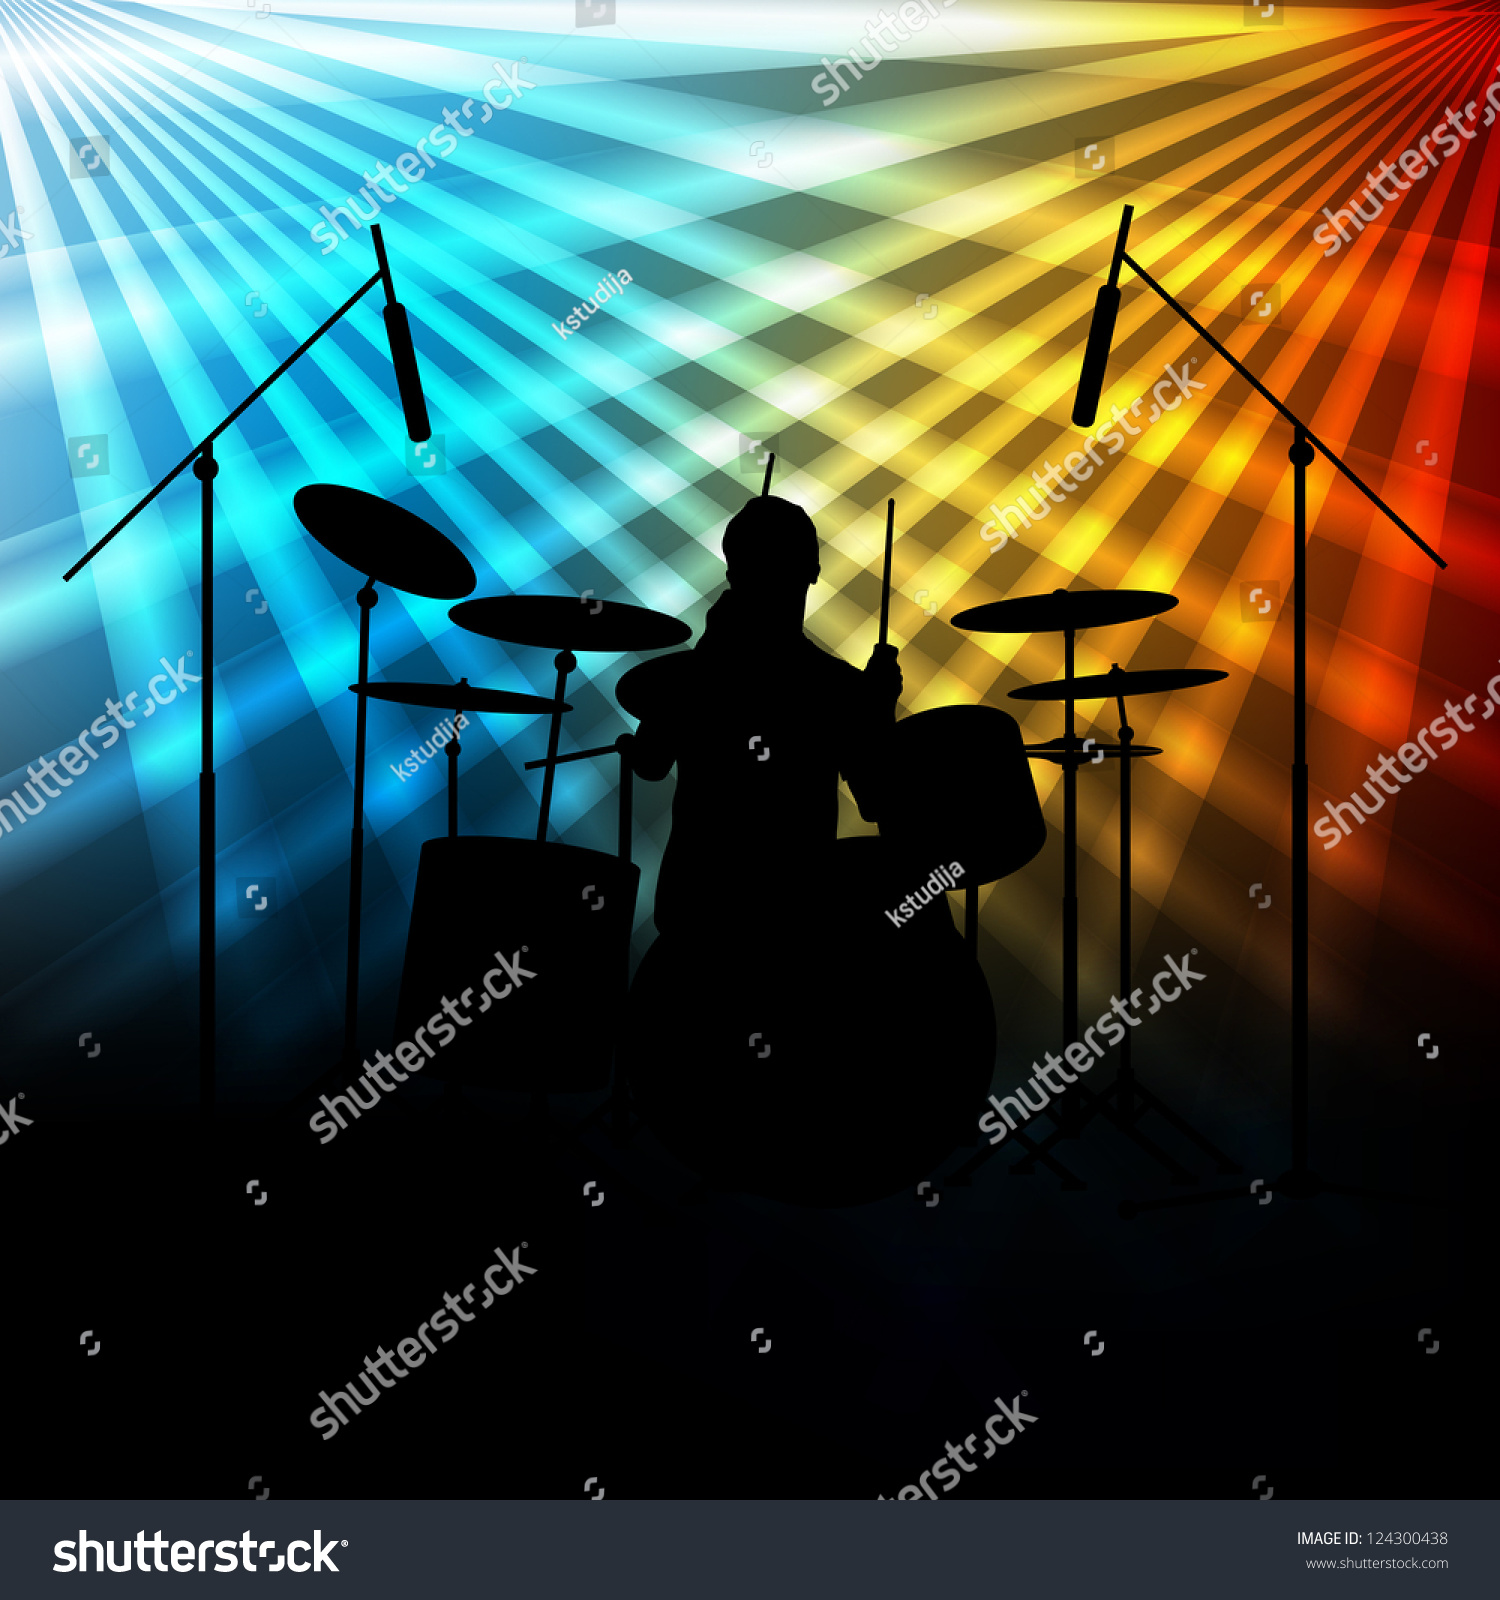 Rock band vector background with neon lights #124300438